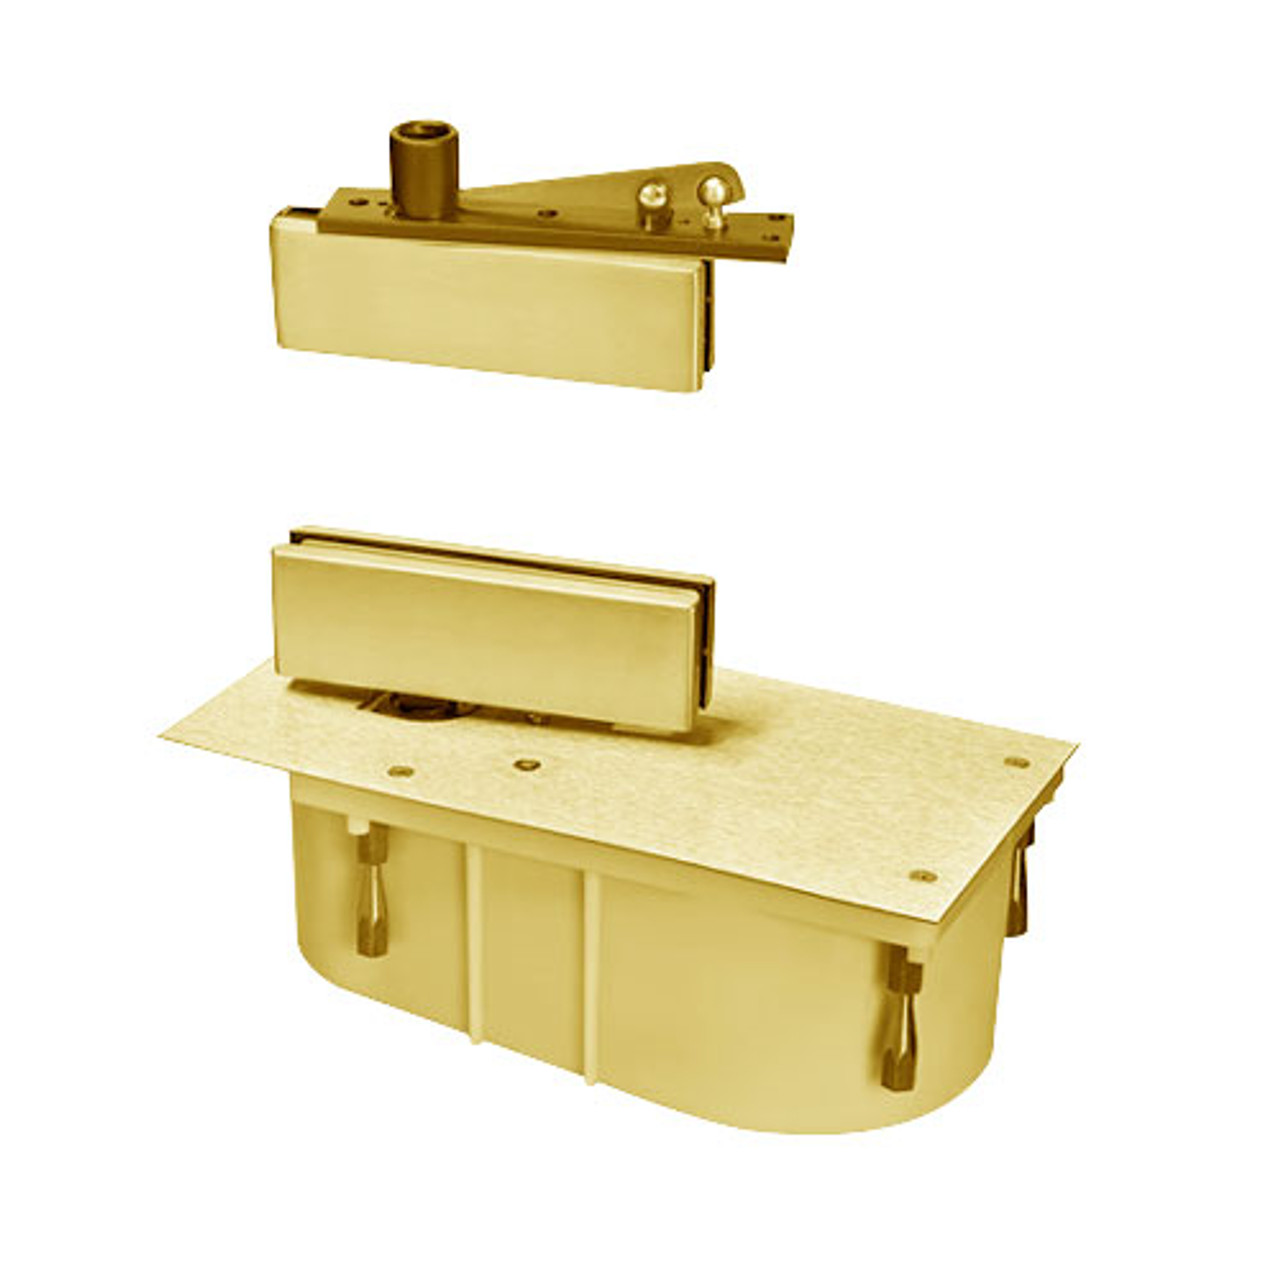 428-105S-CWF-RH-605 Rixson 428 Series Heavy Duty Single Acting Center Hung Floor Closer with Patch Fittings in Bright Brass Finish